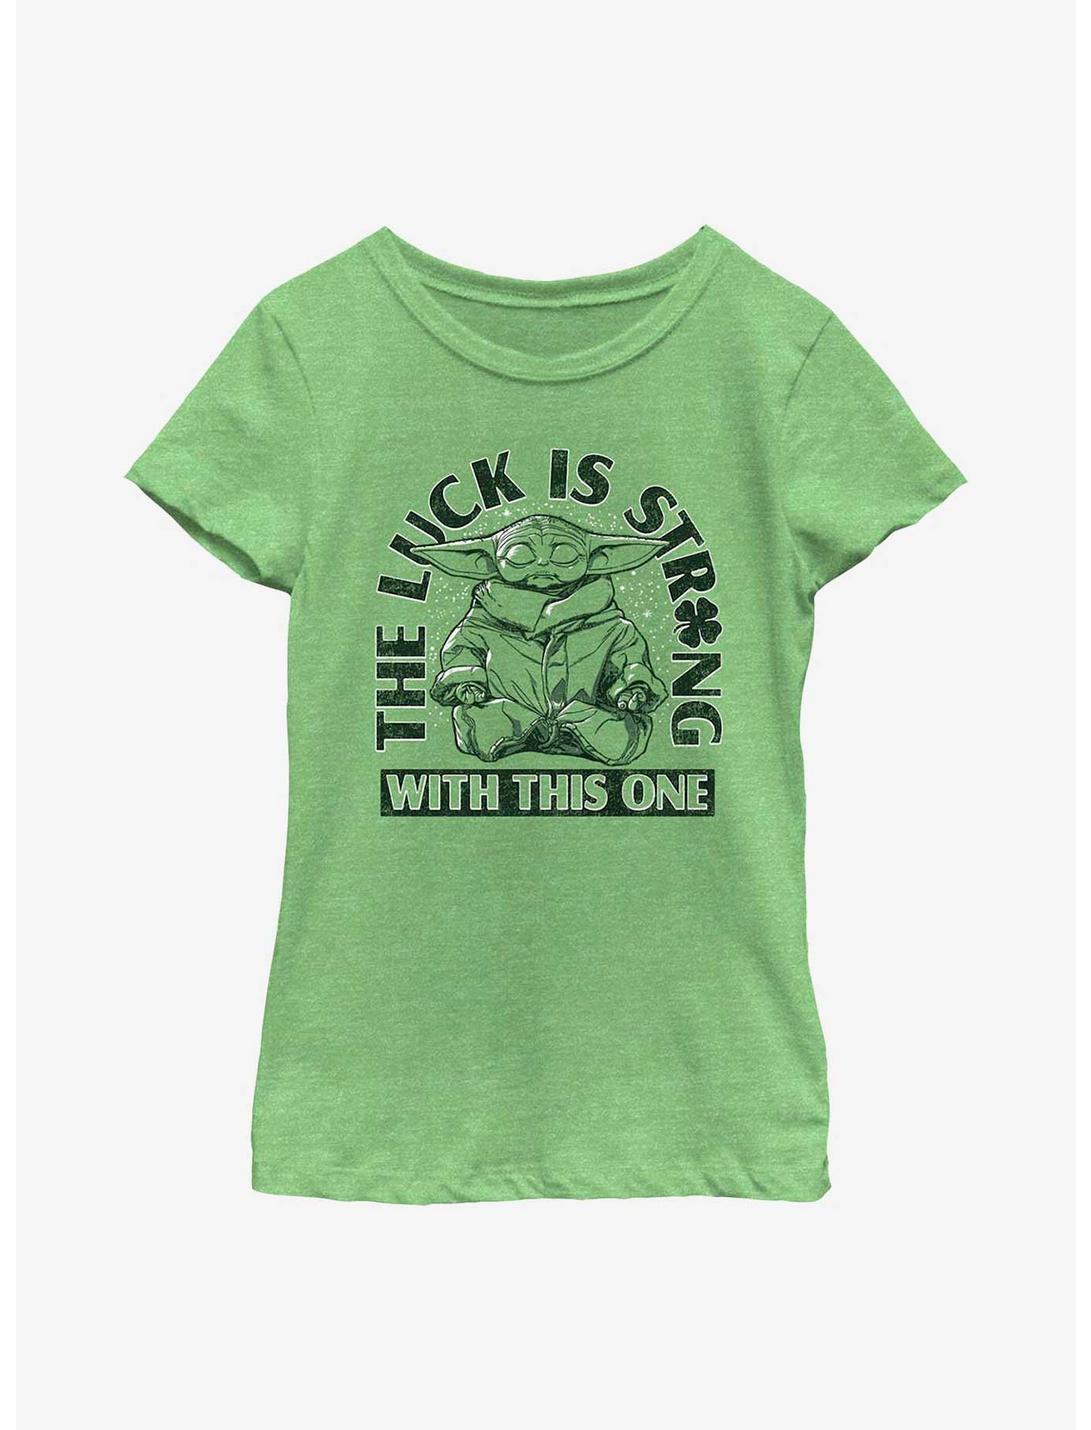 Star Wars The Mandalorian Luck Is Strong Youth Girls T-Shirt, GRN APPLE, hi-res